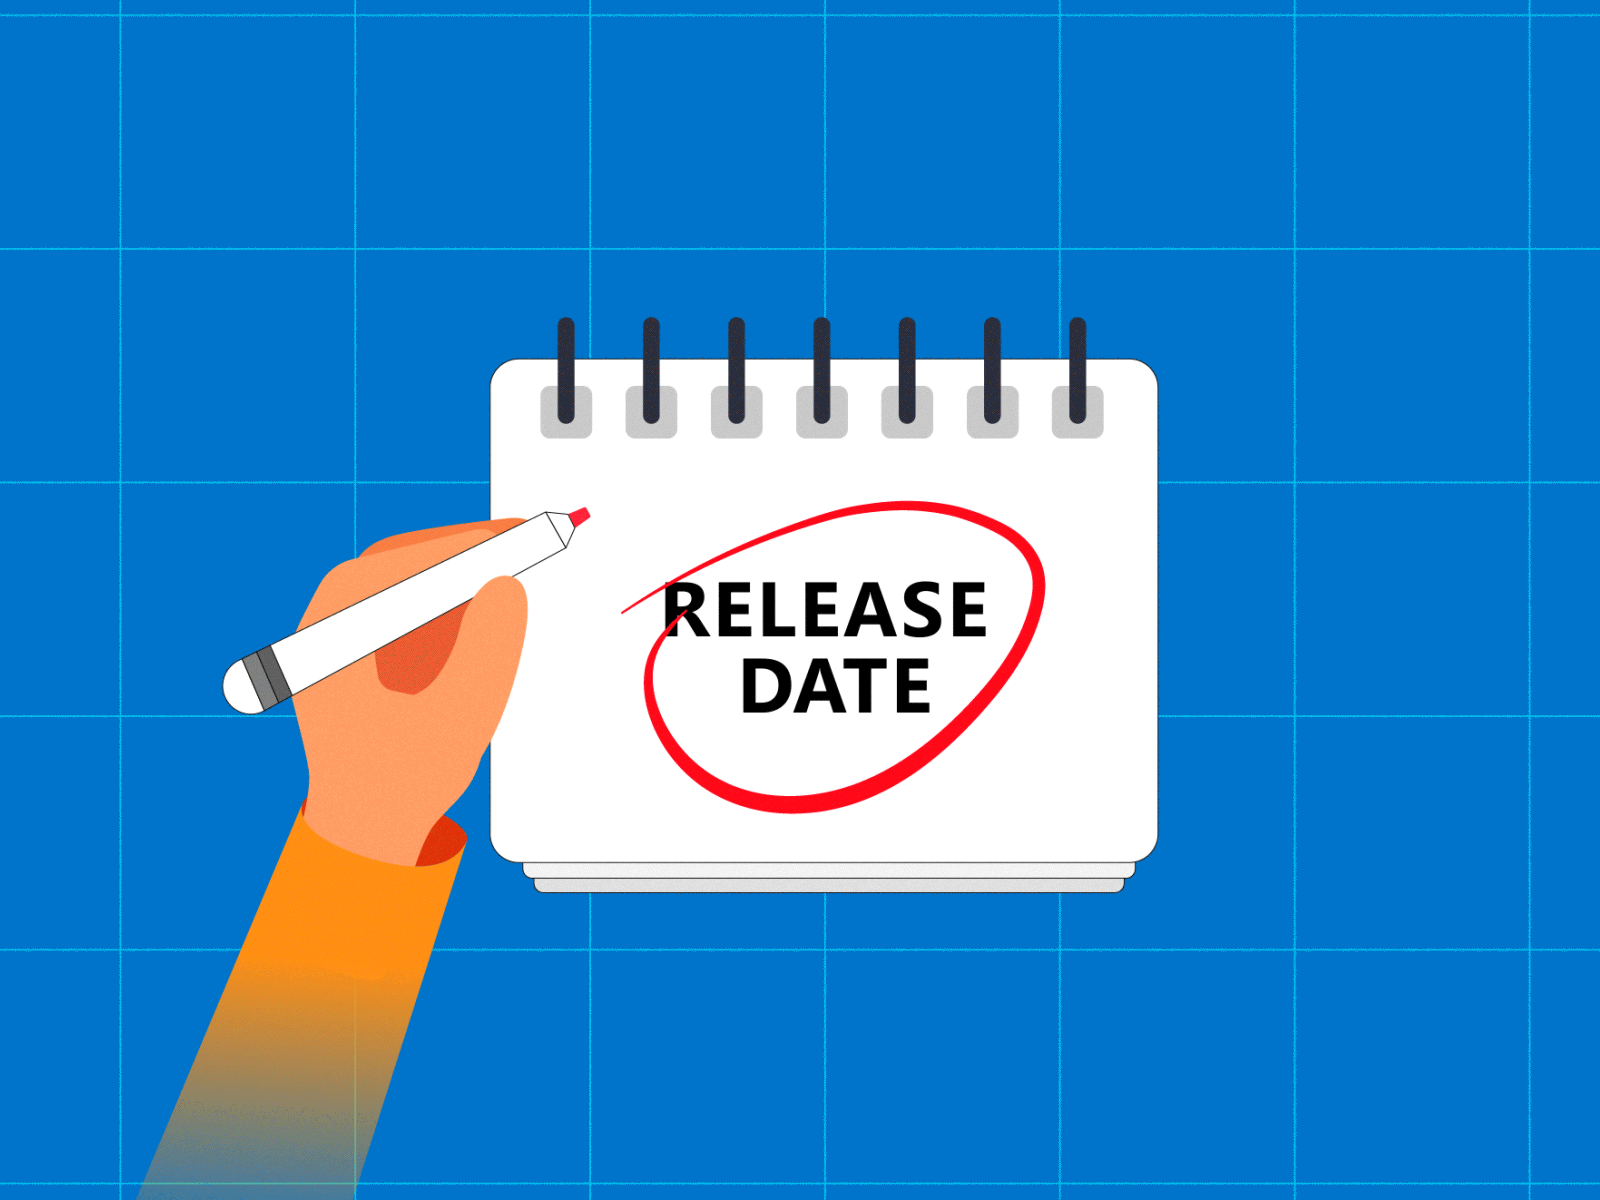 Release Day animation blulux corporate design graphic design illustration microsoft motion graphics vector